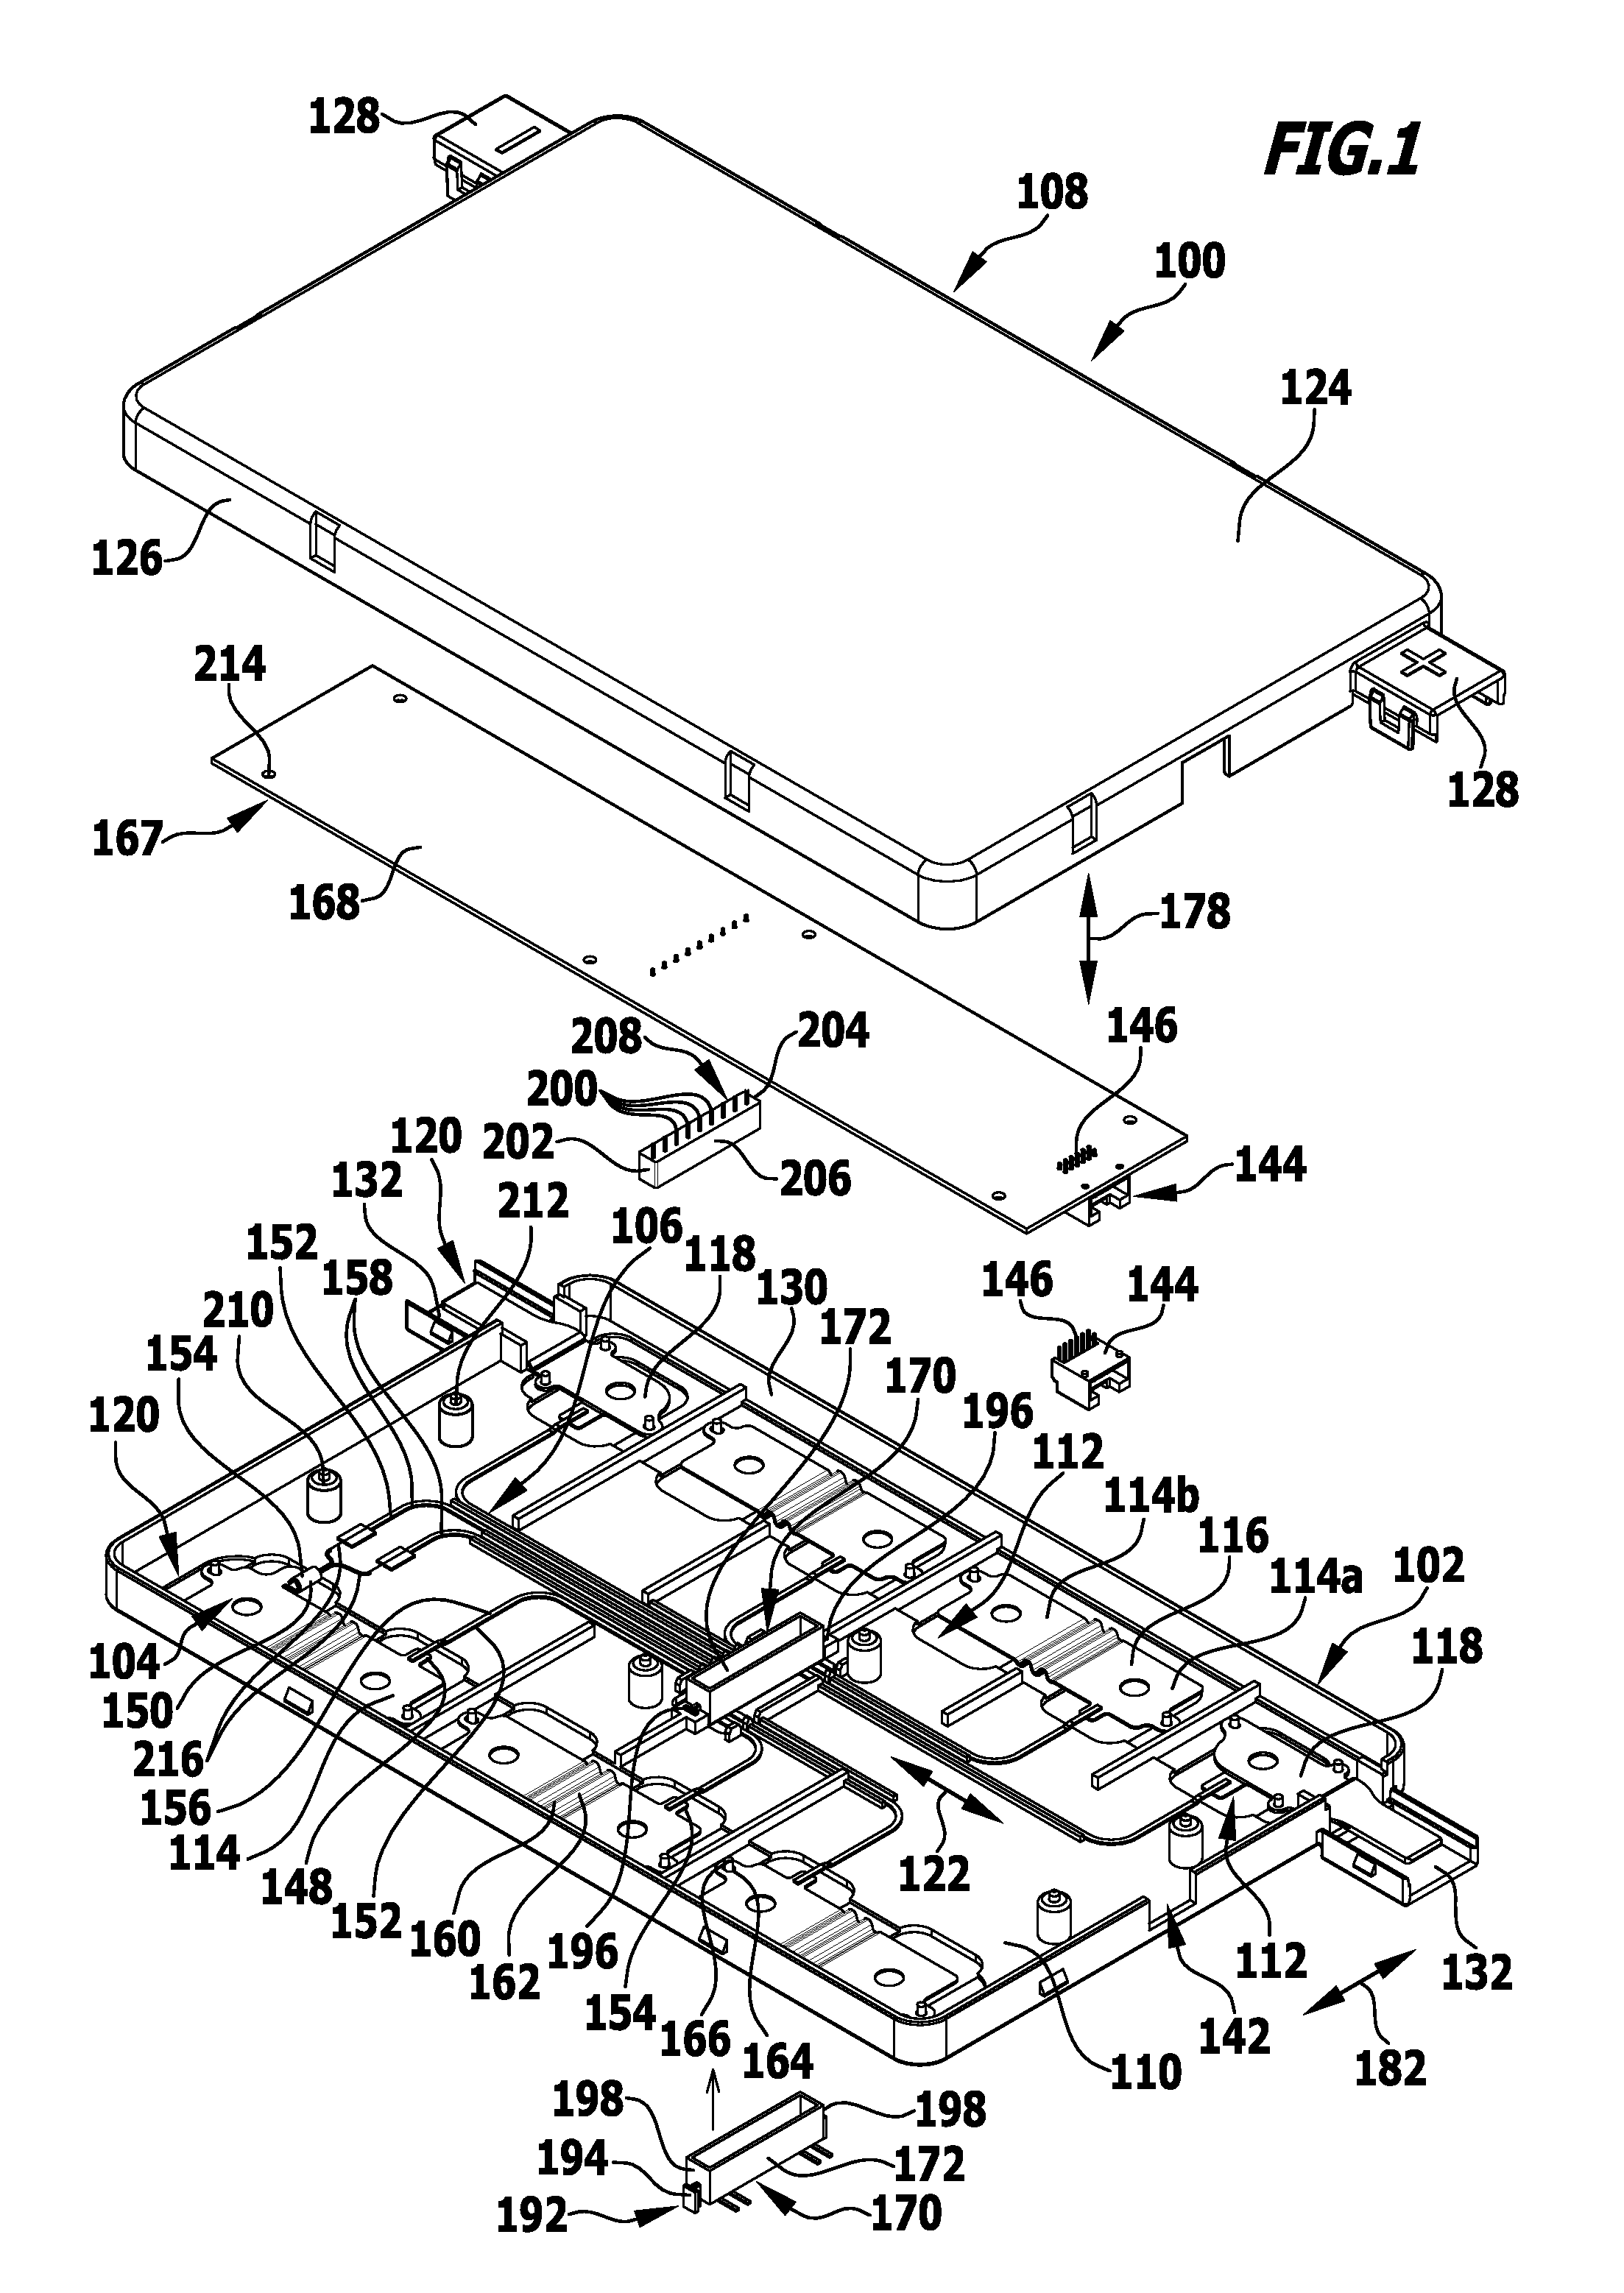 Cell contact-making system for an electrochemical device